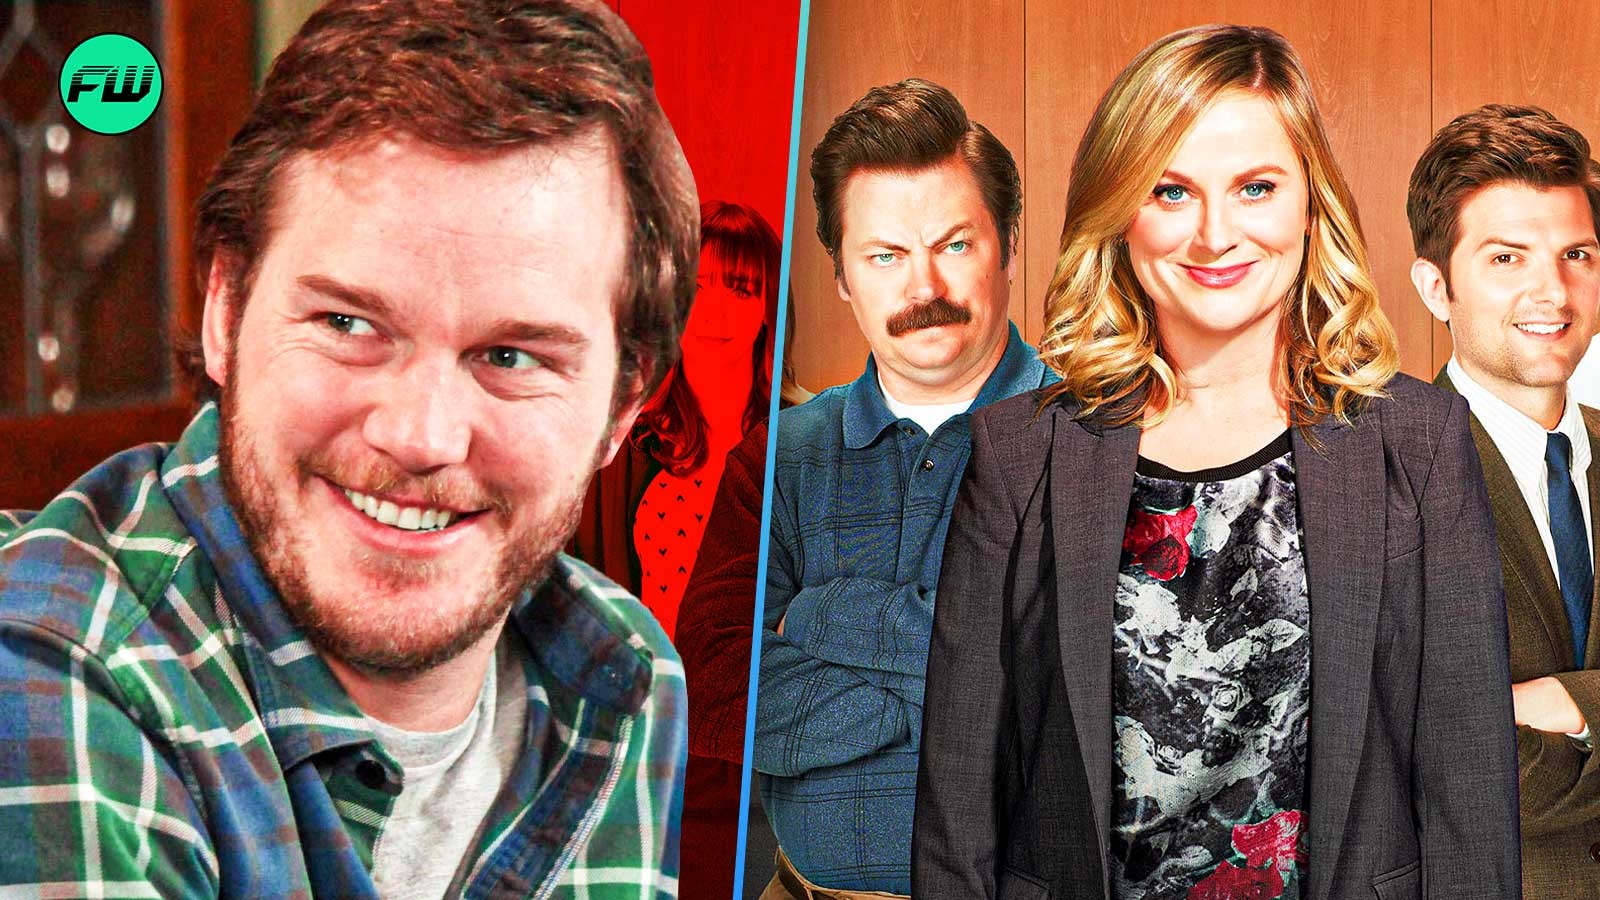 An army of writers couldn’t think of a single line that Chris Pratt wrote for Parks and Recreation that was completely improvised